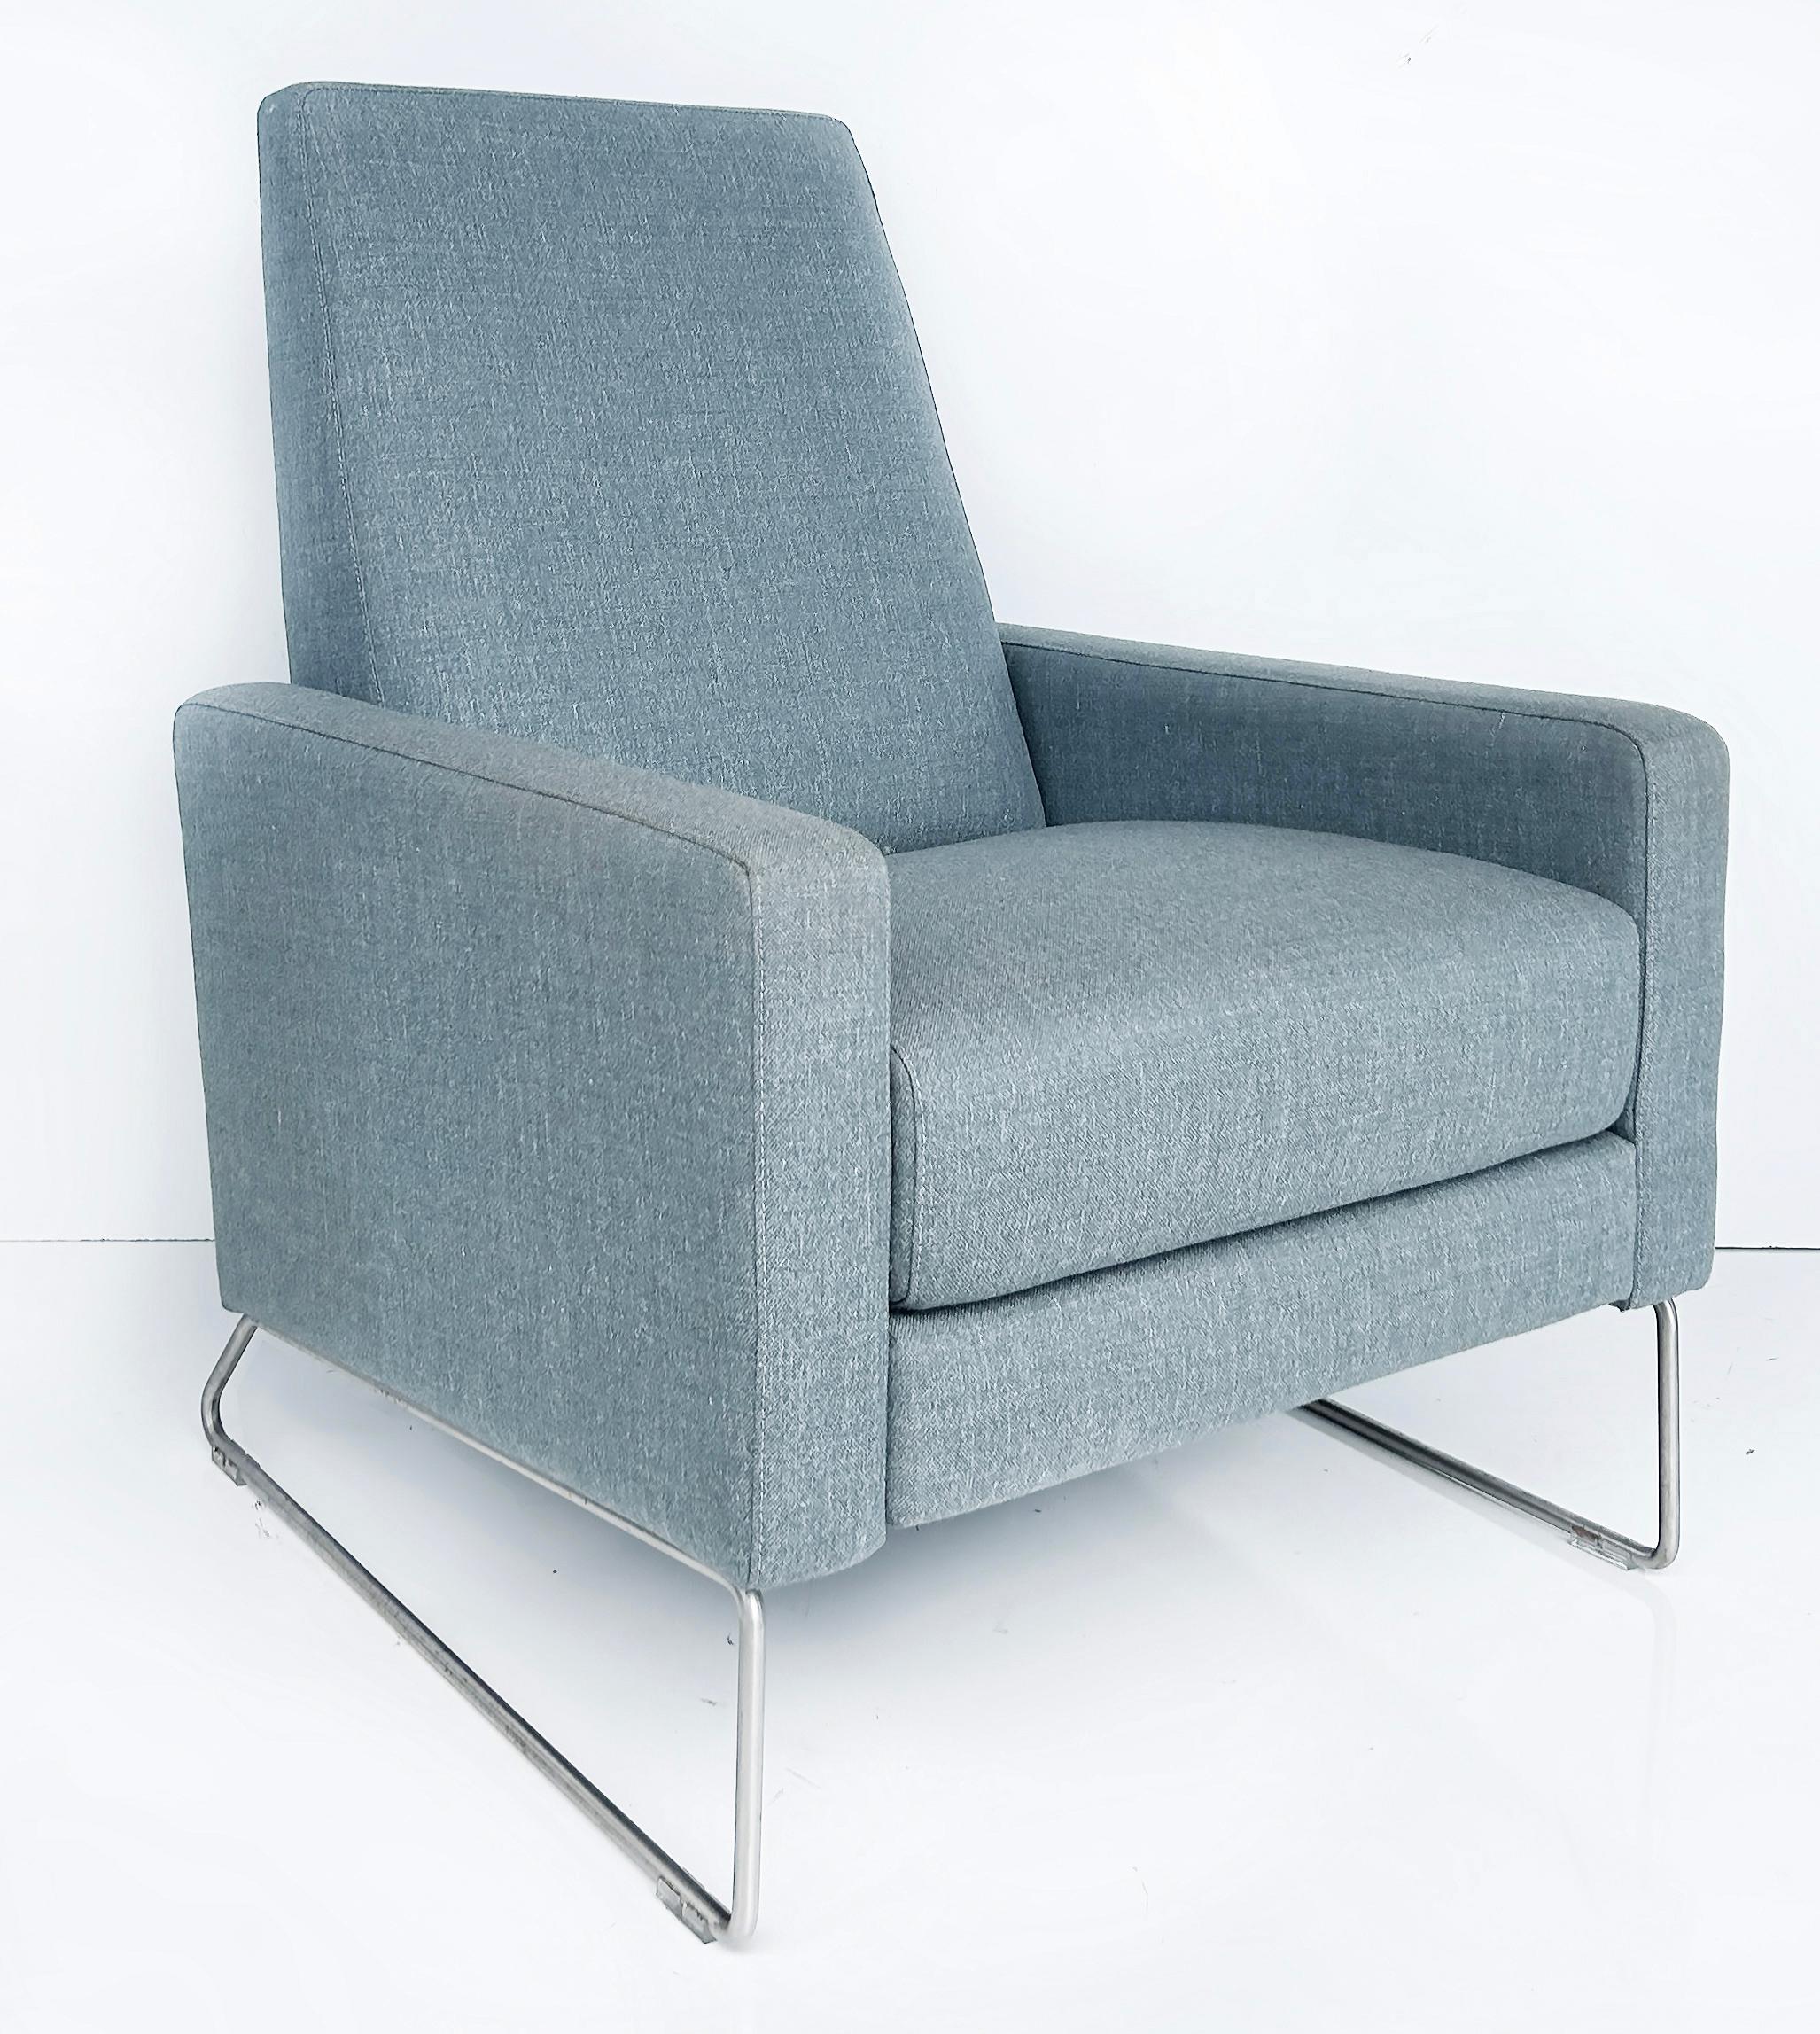 Modern Design Within Reach Flight Recliner, Stainless Steel and Linen Fabric